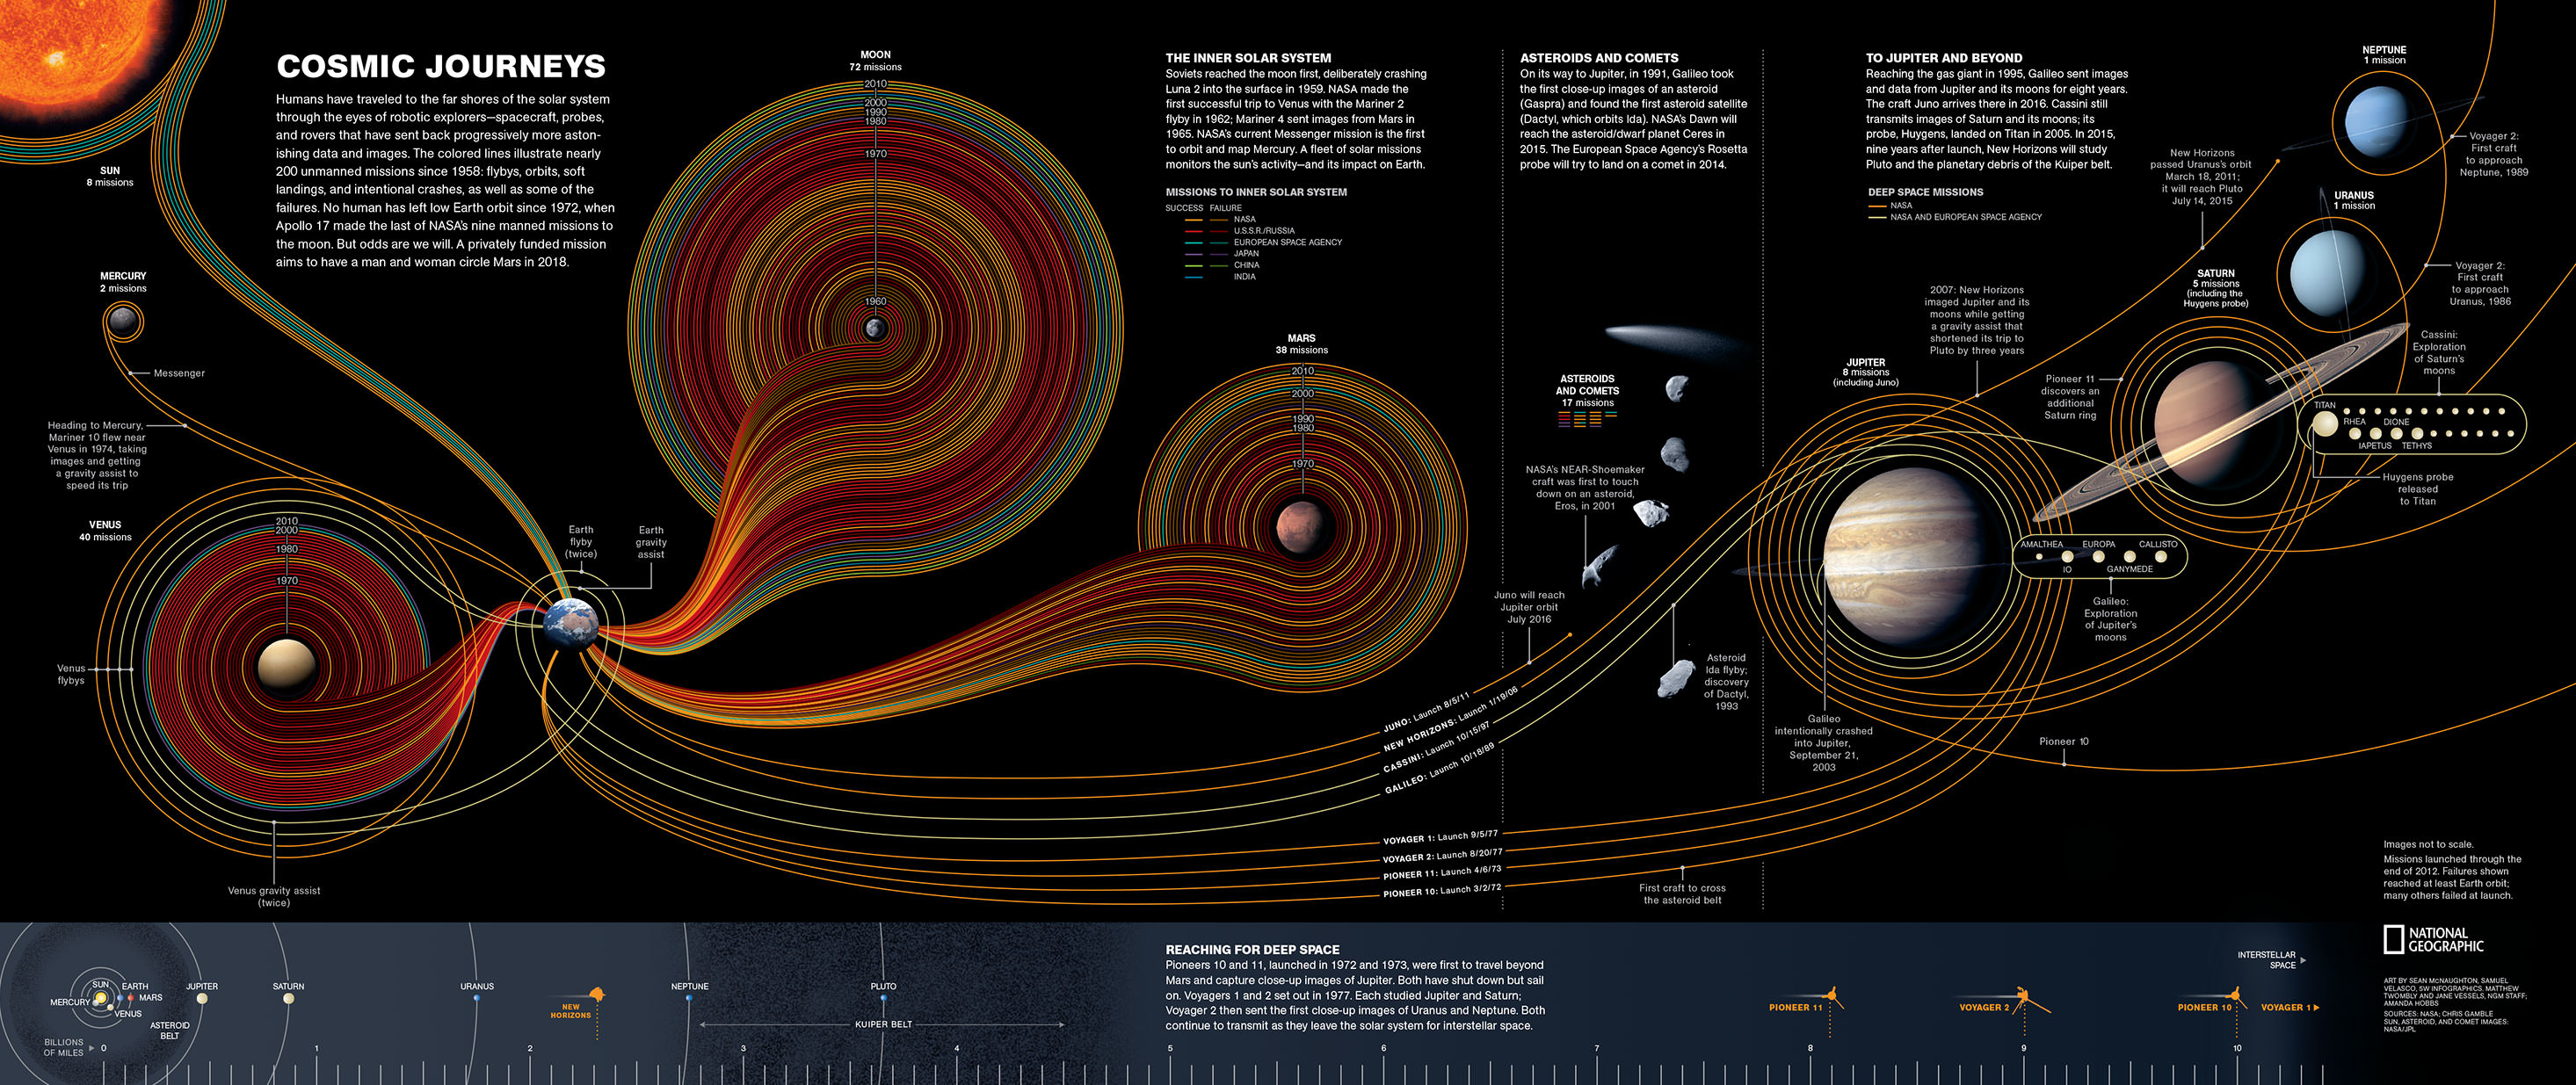 The Chart Of Cosmic Exploration Poster